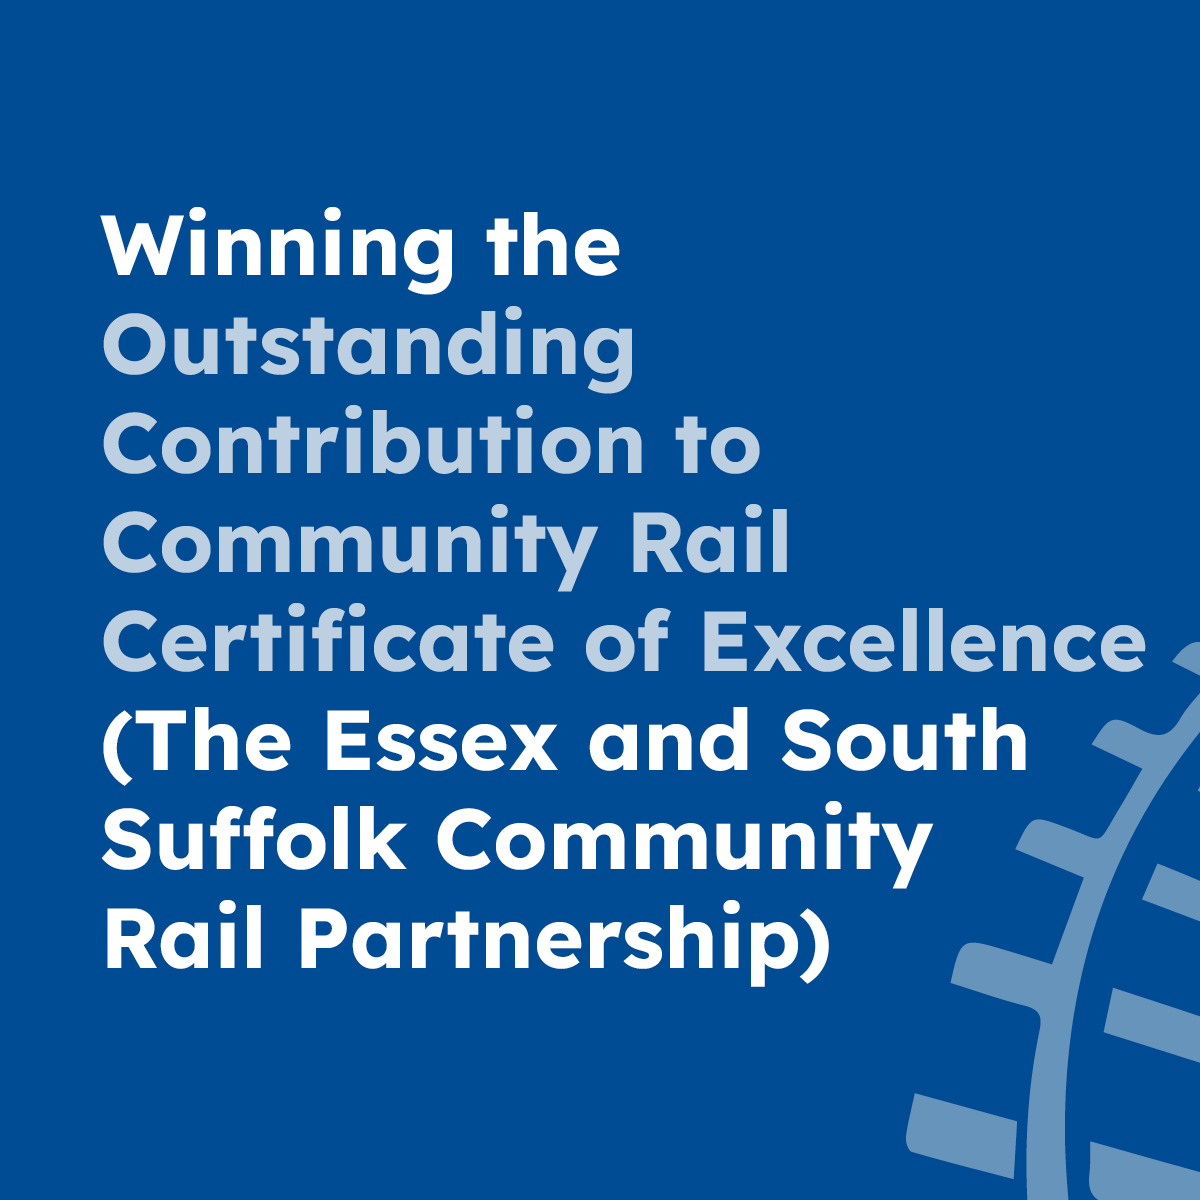 Wiinning the Outstanding Contribution to Community Rail Certificate of Excellence (The Essex and South Suffolk Community Rail Partnership)